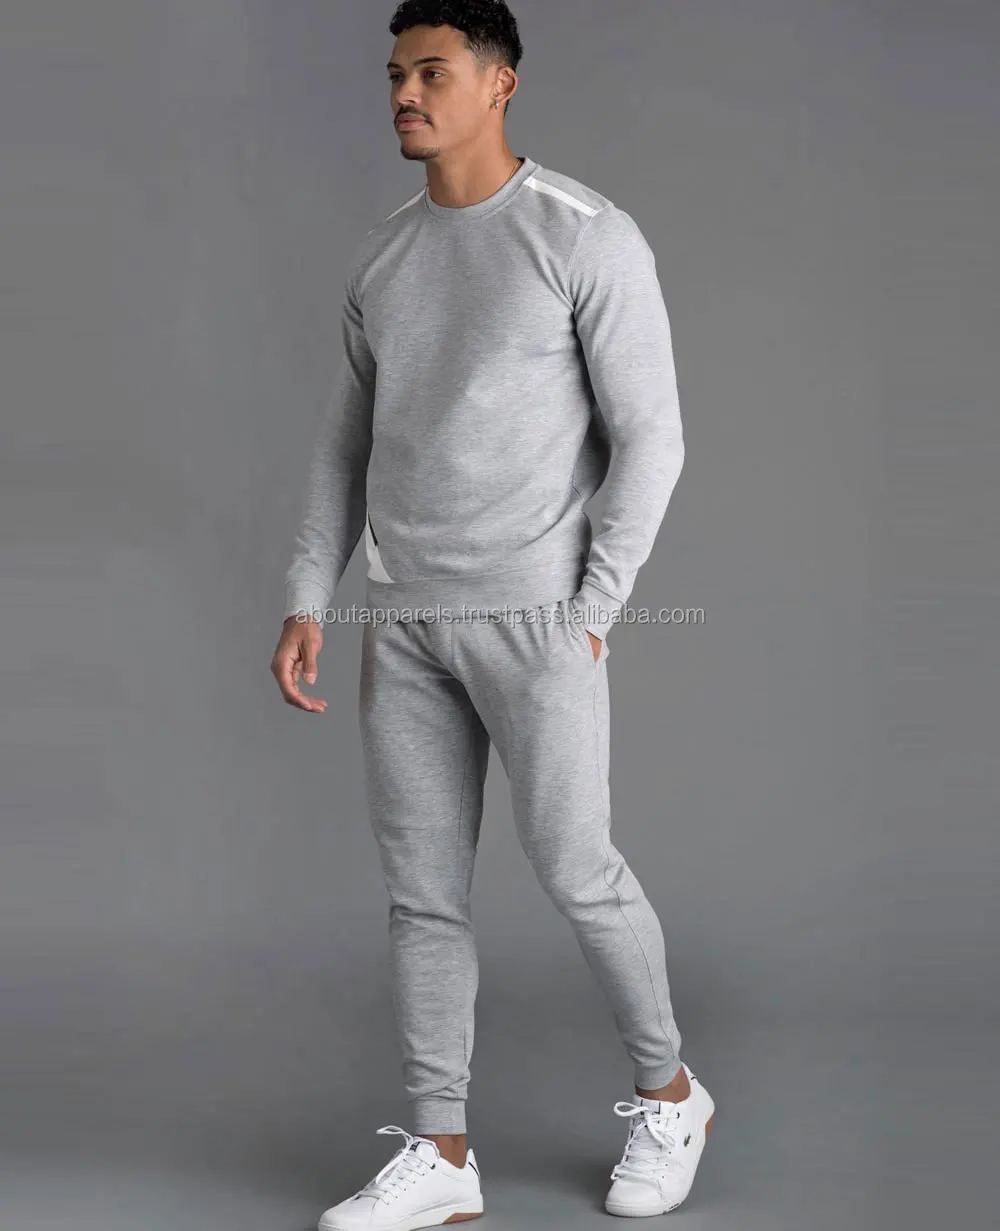 Wholesale Blank Jogging Suits Mens Sweat Suit/custom Made Tracksuits ...